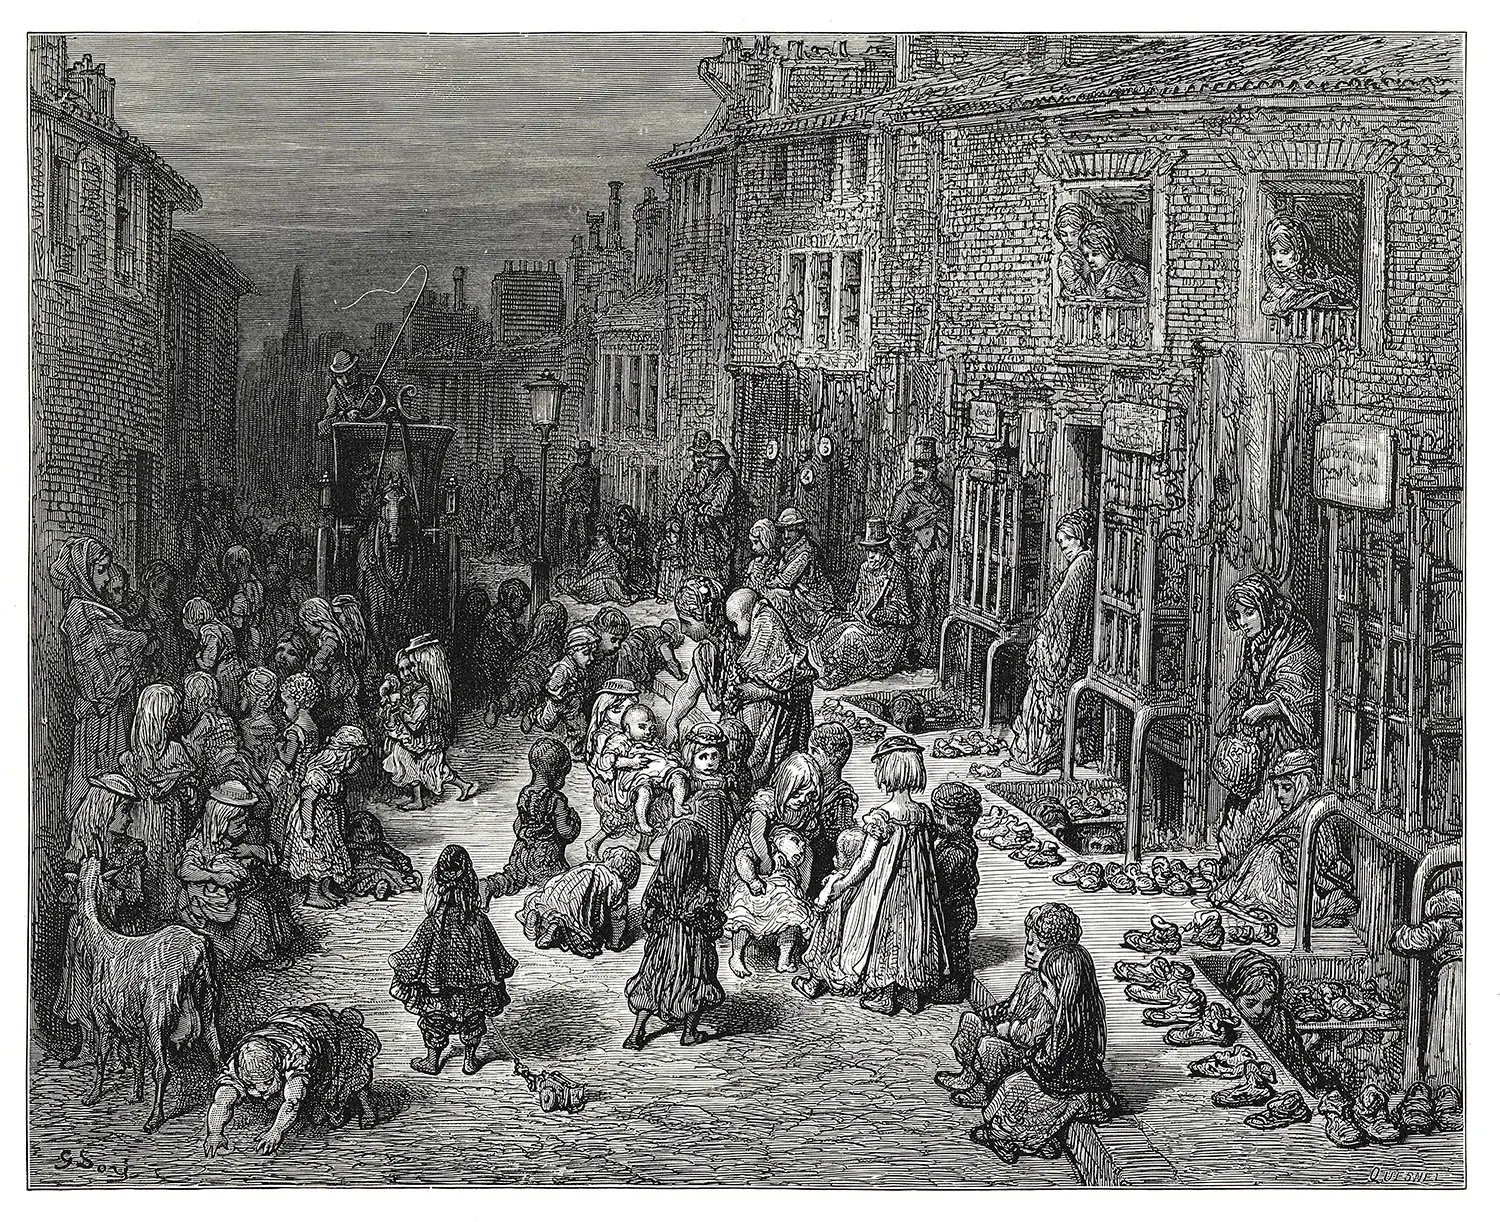 A scene of poverty in Victorian England: The Seven Dials slum is depicted with the streets packed with crowds of men, women, and children. A stage coach is approaching, seemingly unable to navigate the street due to how crowded it is.